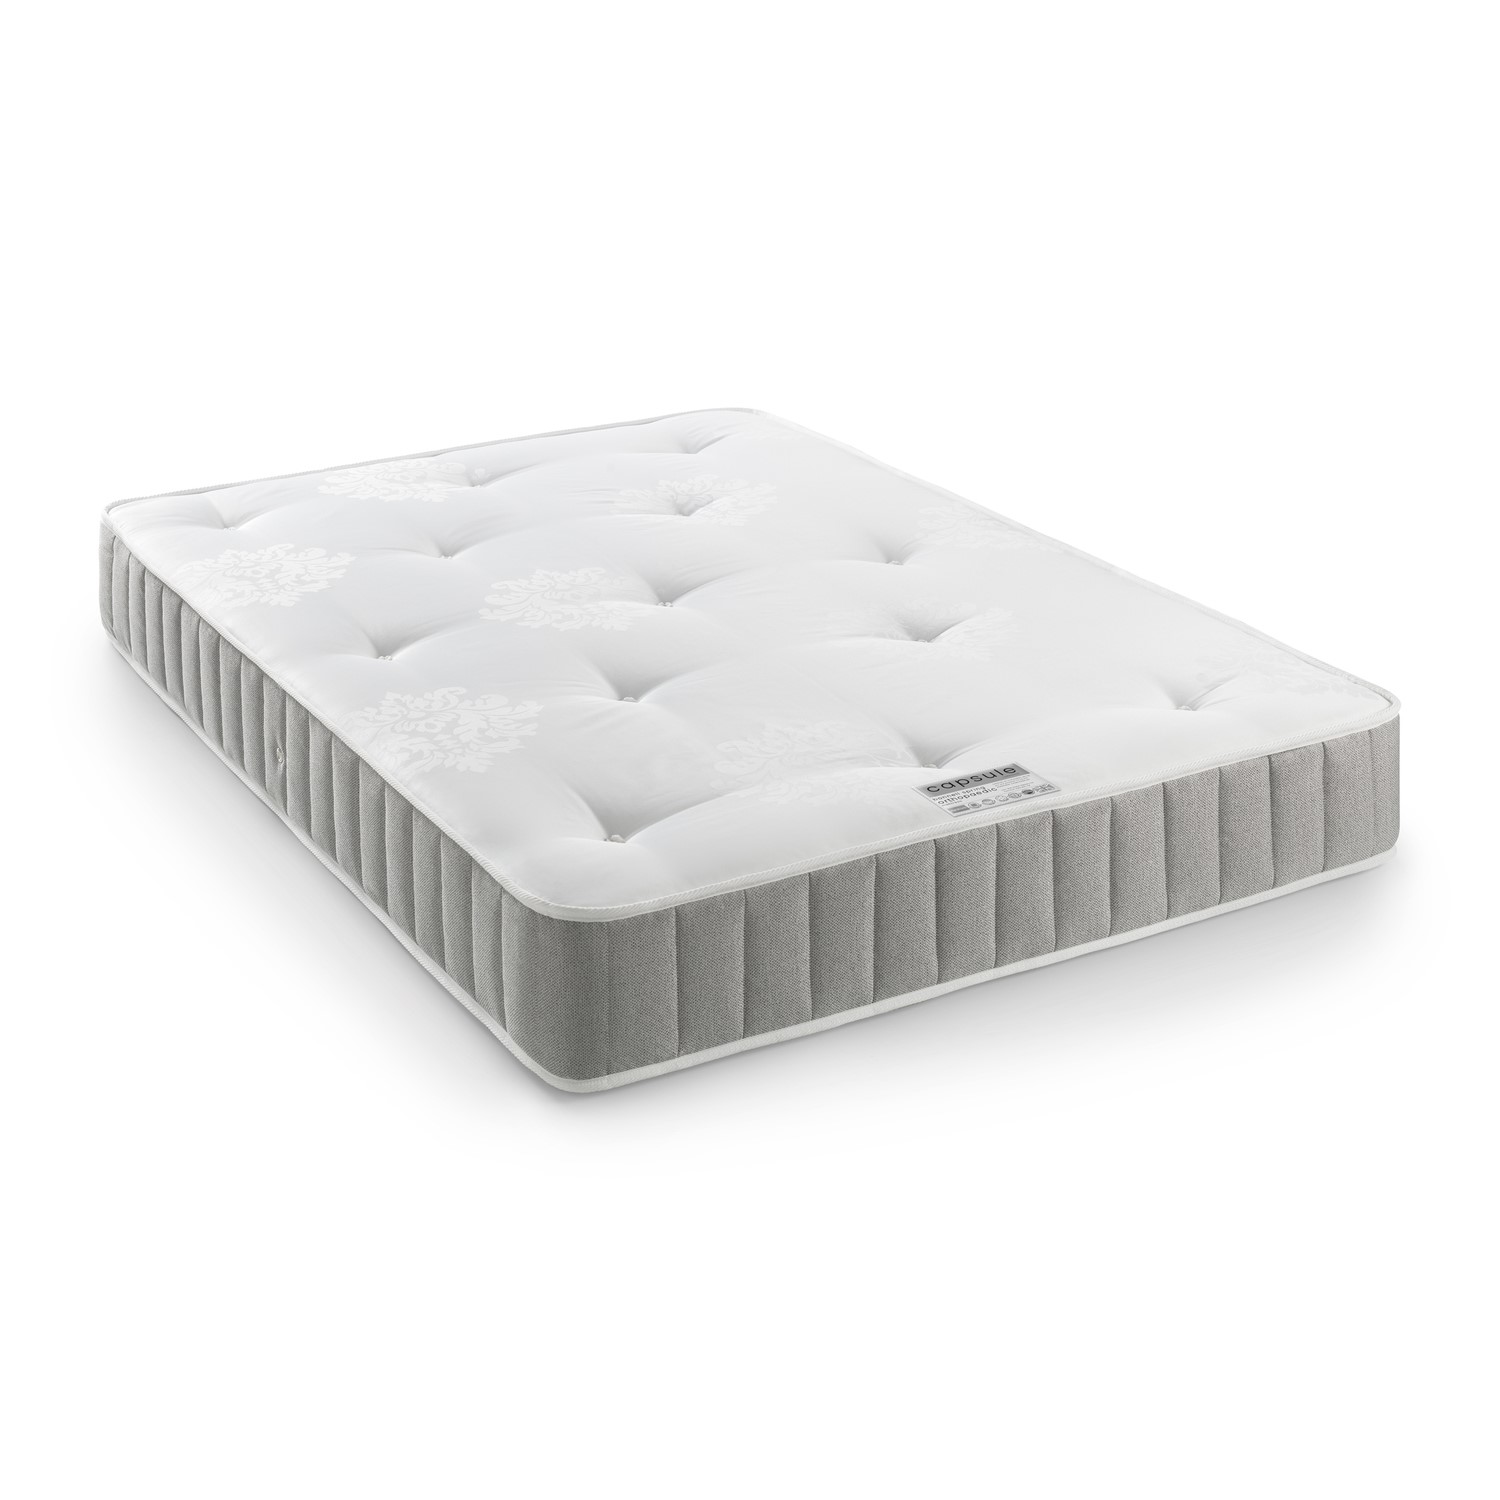 Read more about Double orthopaedic open coil spring padded top mattress capsule julian bowen